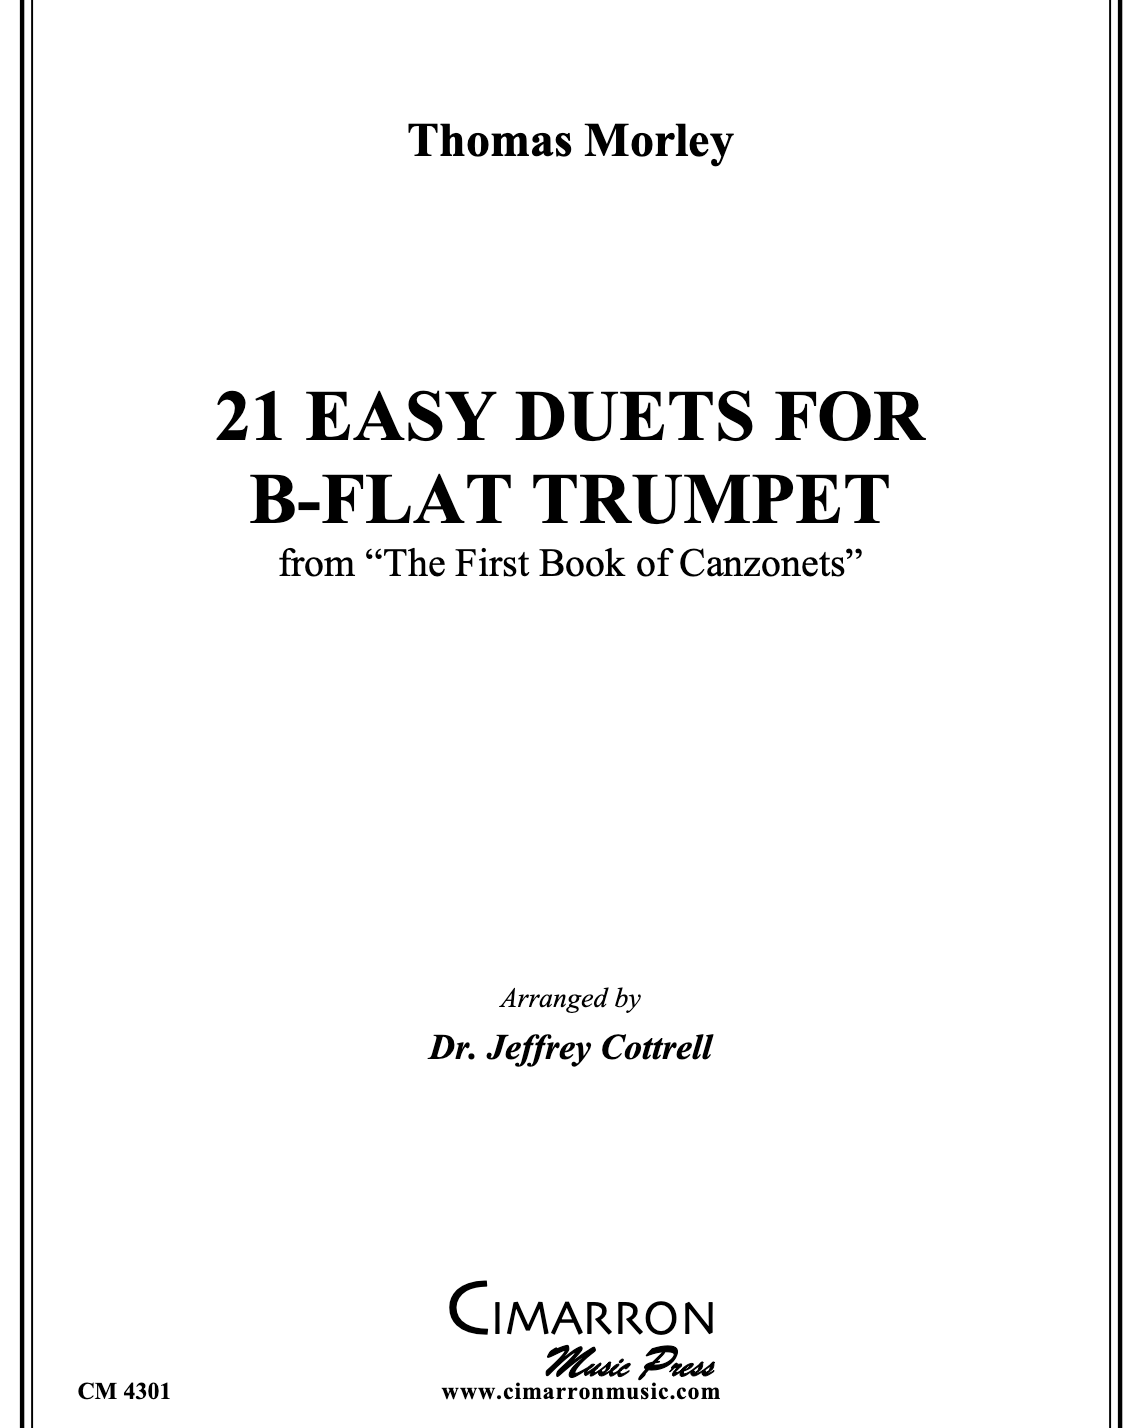 21 Easy Duets (from 'The First Book of Canzonets')